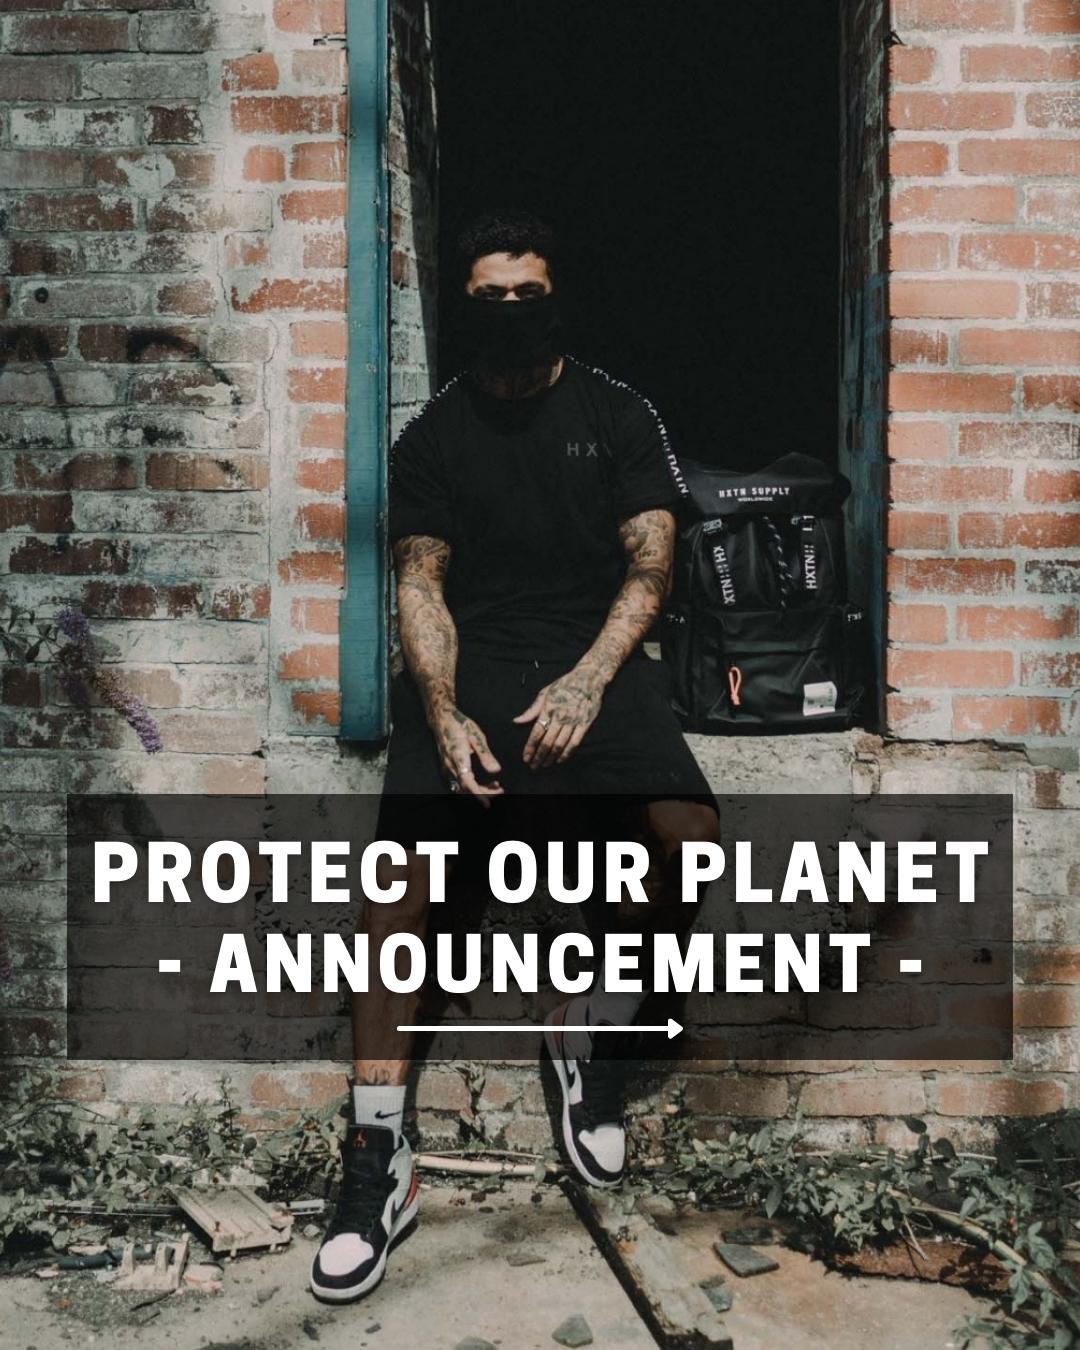 Protect Our Planet